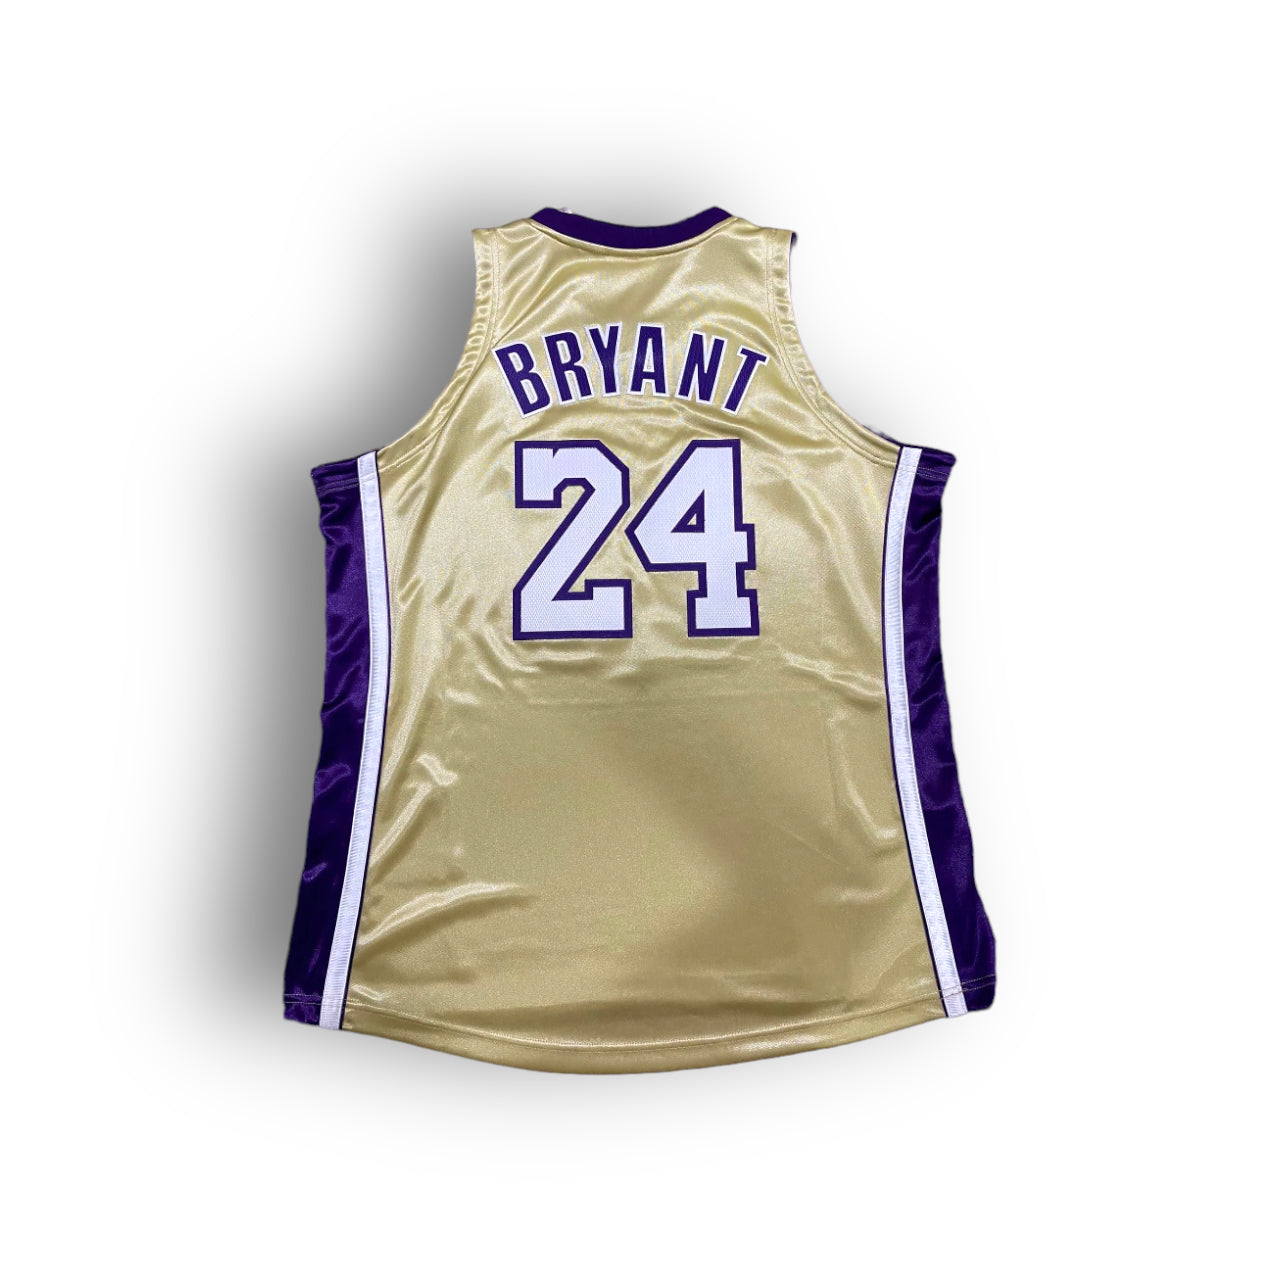 Mitchell and Ness Kobe Bryant Los Angeles Lakers Hall of Fame Edition feat. "Mamba Academy" Authentic Jersey - Gold #24 - Hoop Jersey Store